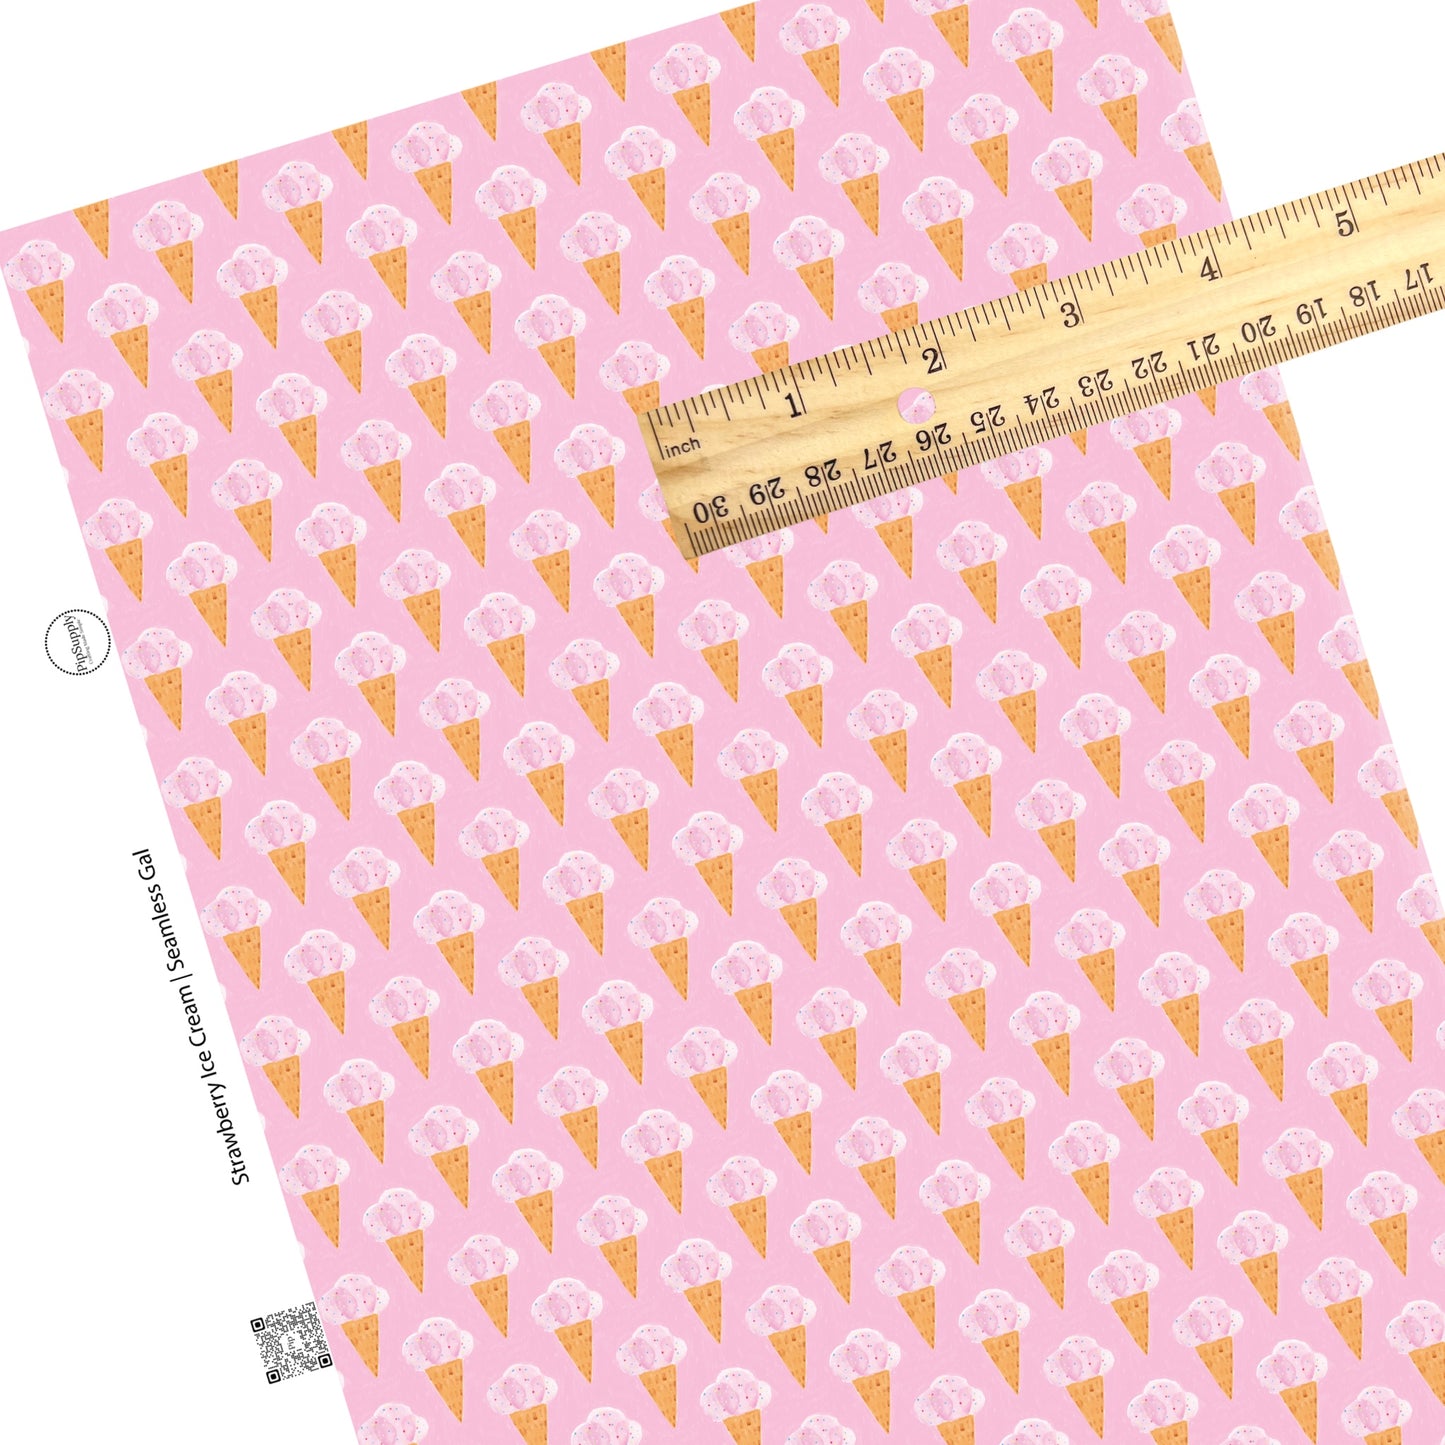 These summer faux leather sheets contain the following design elements: strawberry ice cream on pink. Our CPSIA compliant faux leather sheets or rolls can be used for all types of crafting projects.